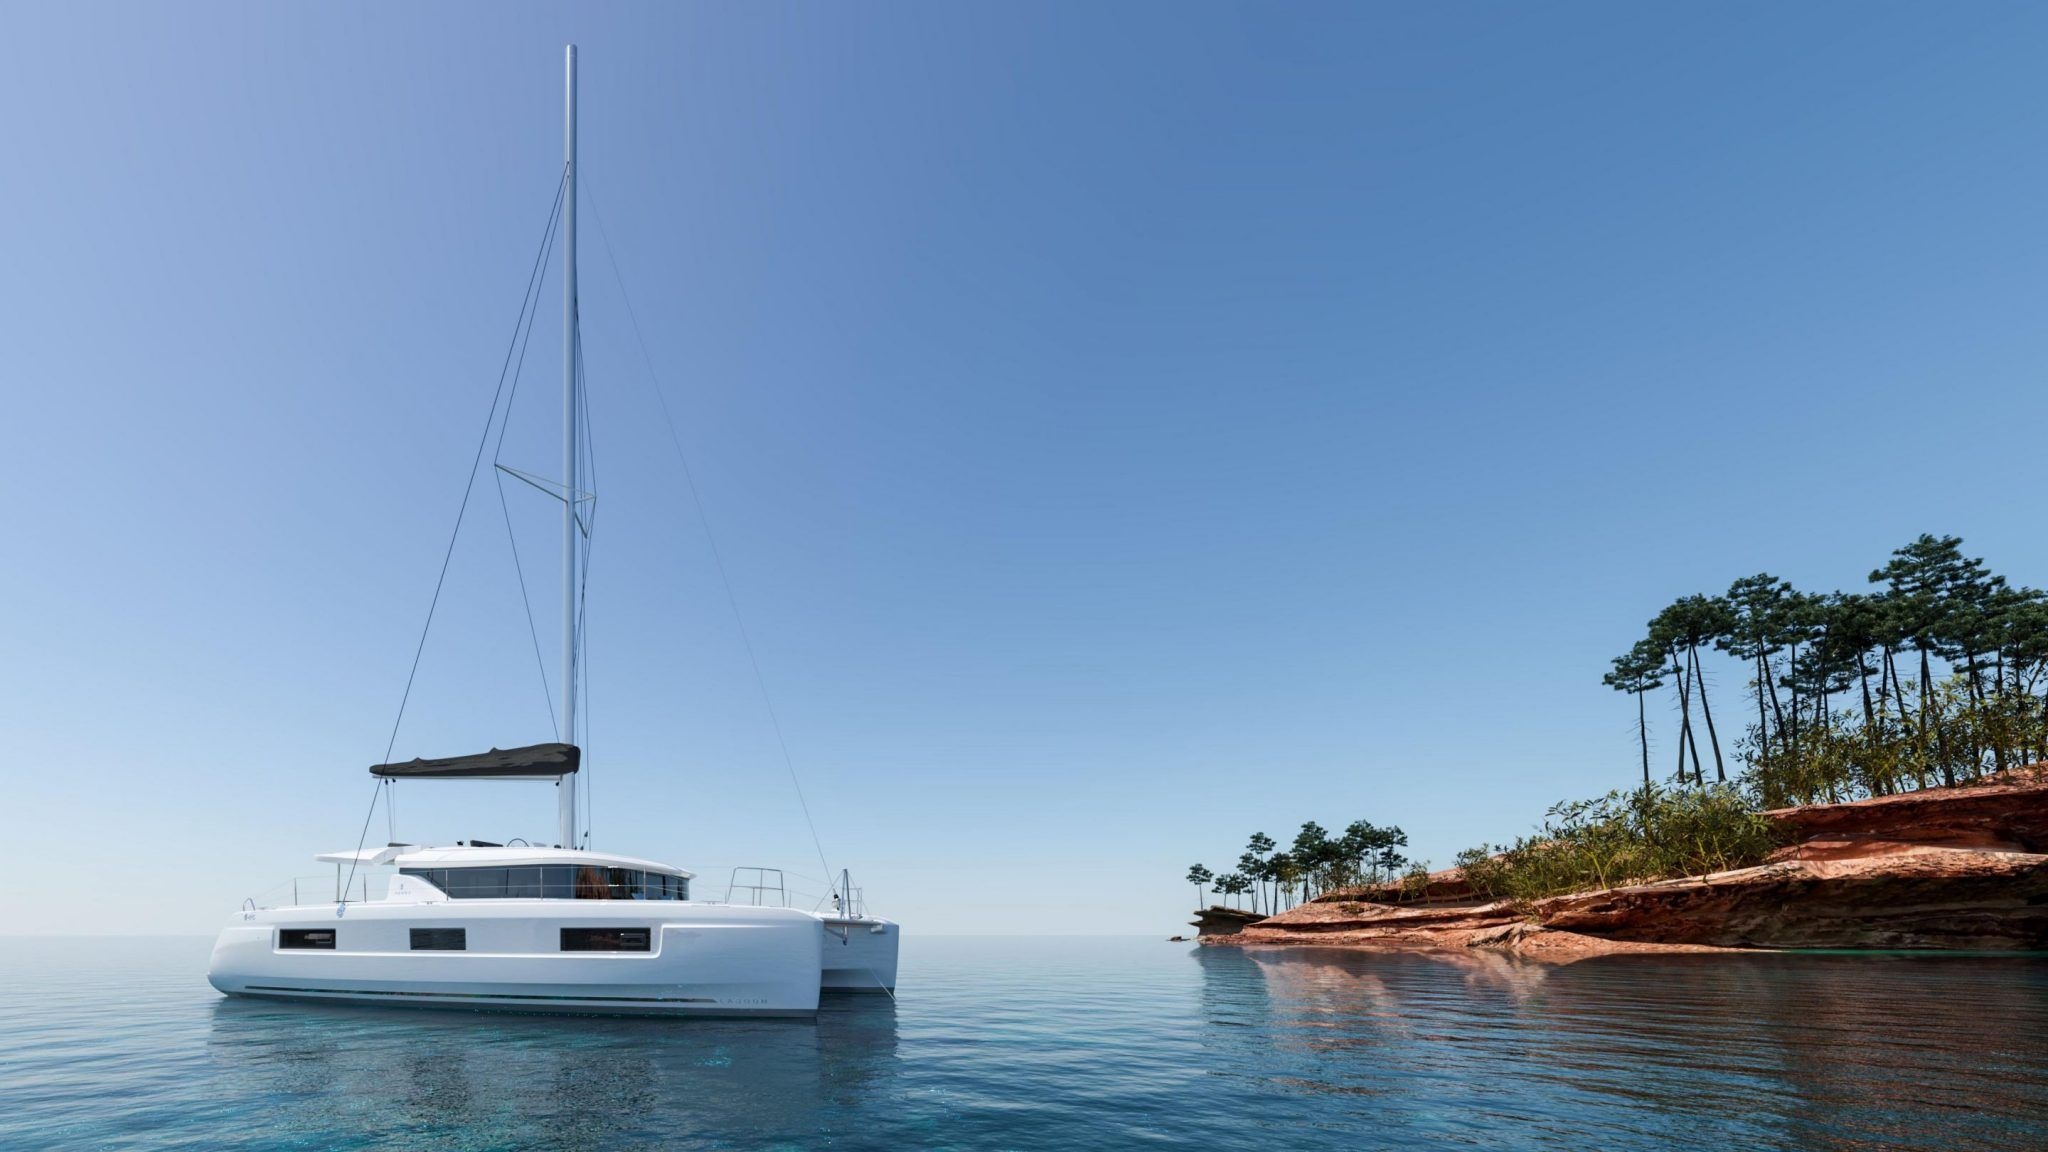 Catamaran: A boat or ship with more than one hull, Blue-water cruising. 2050x1160 HD Wallpaper.